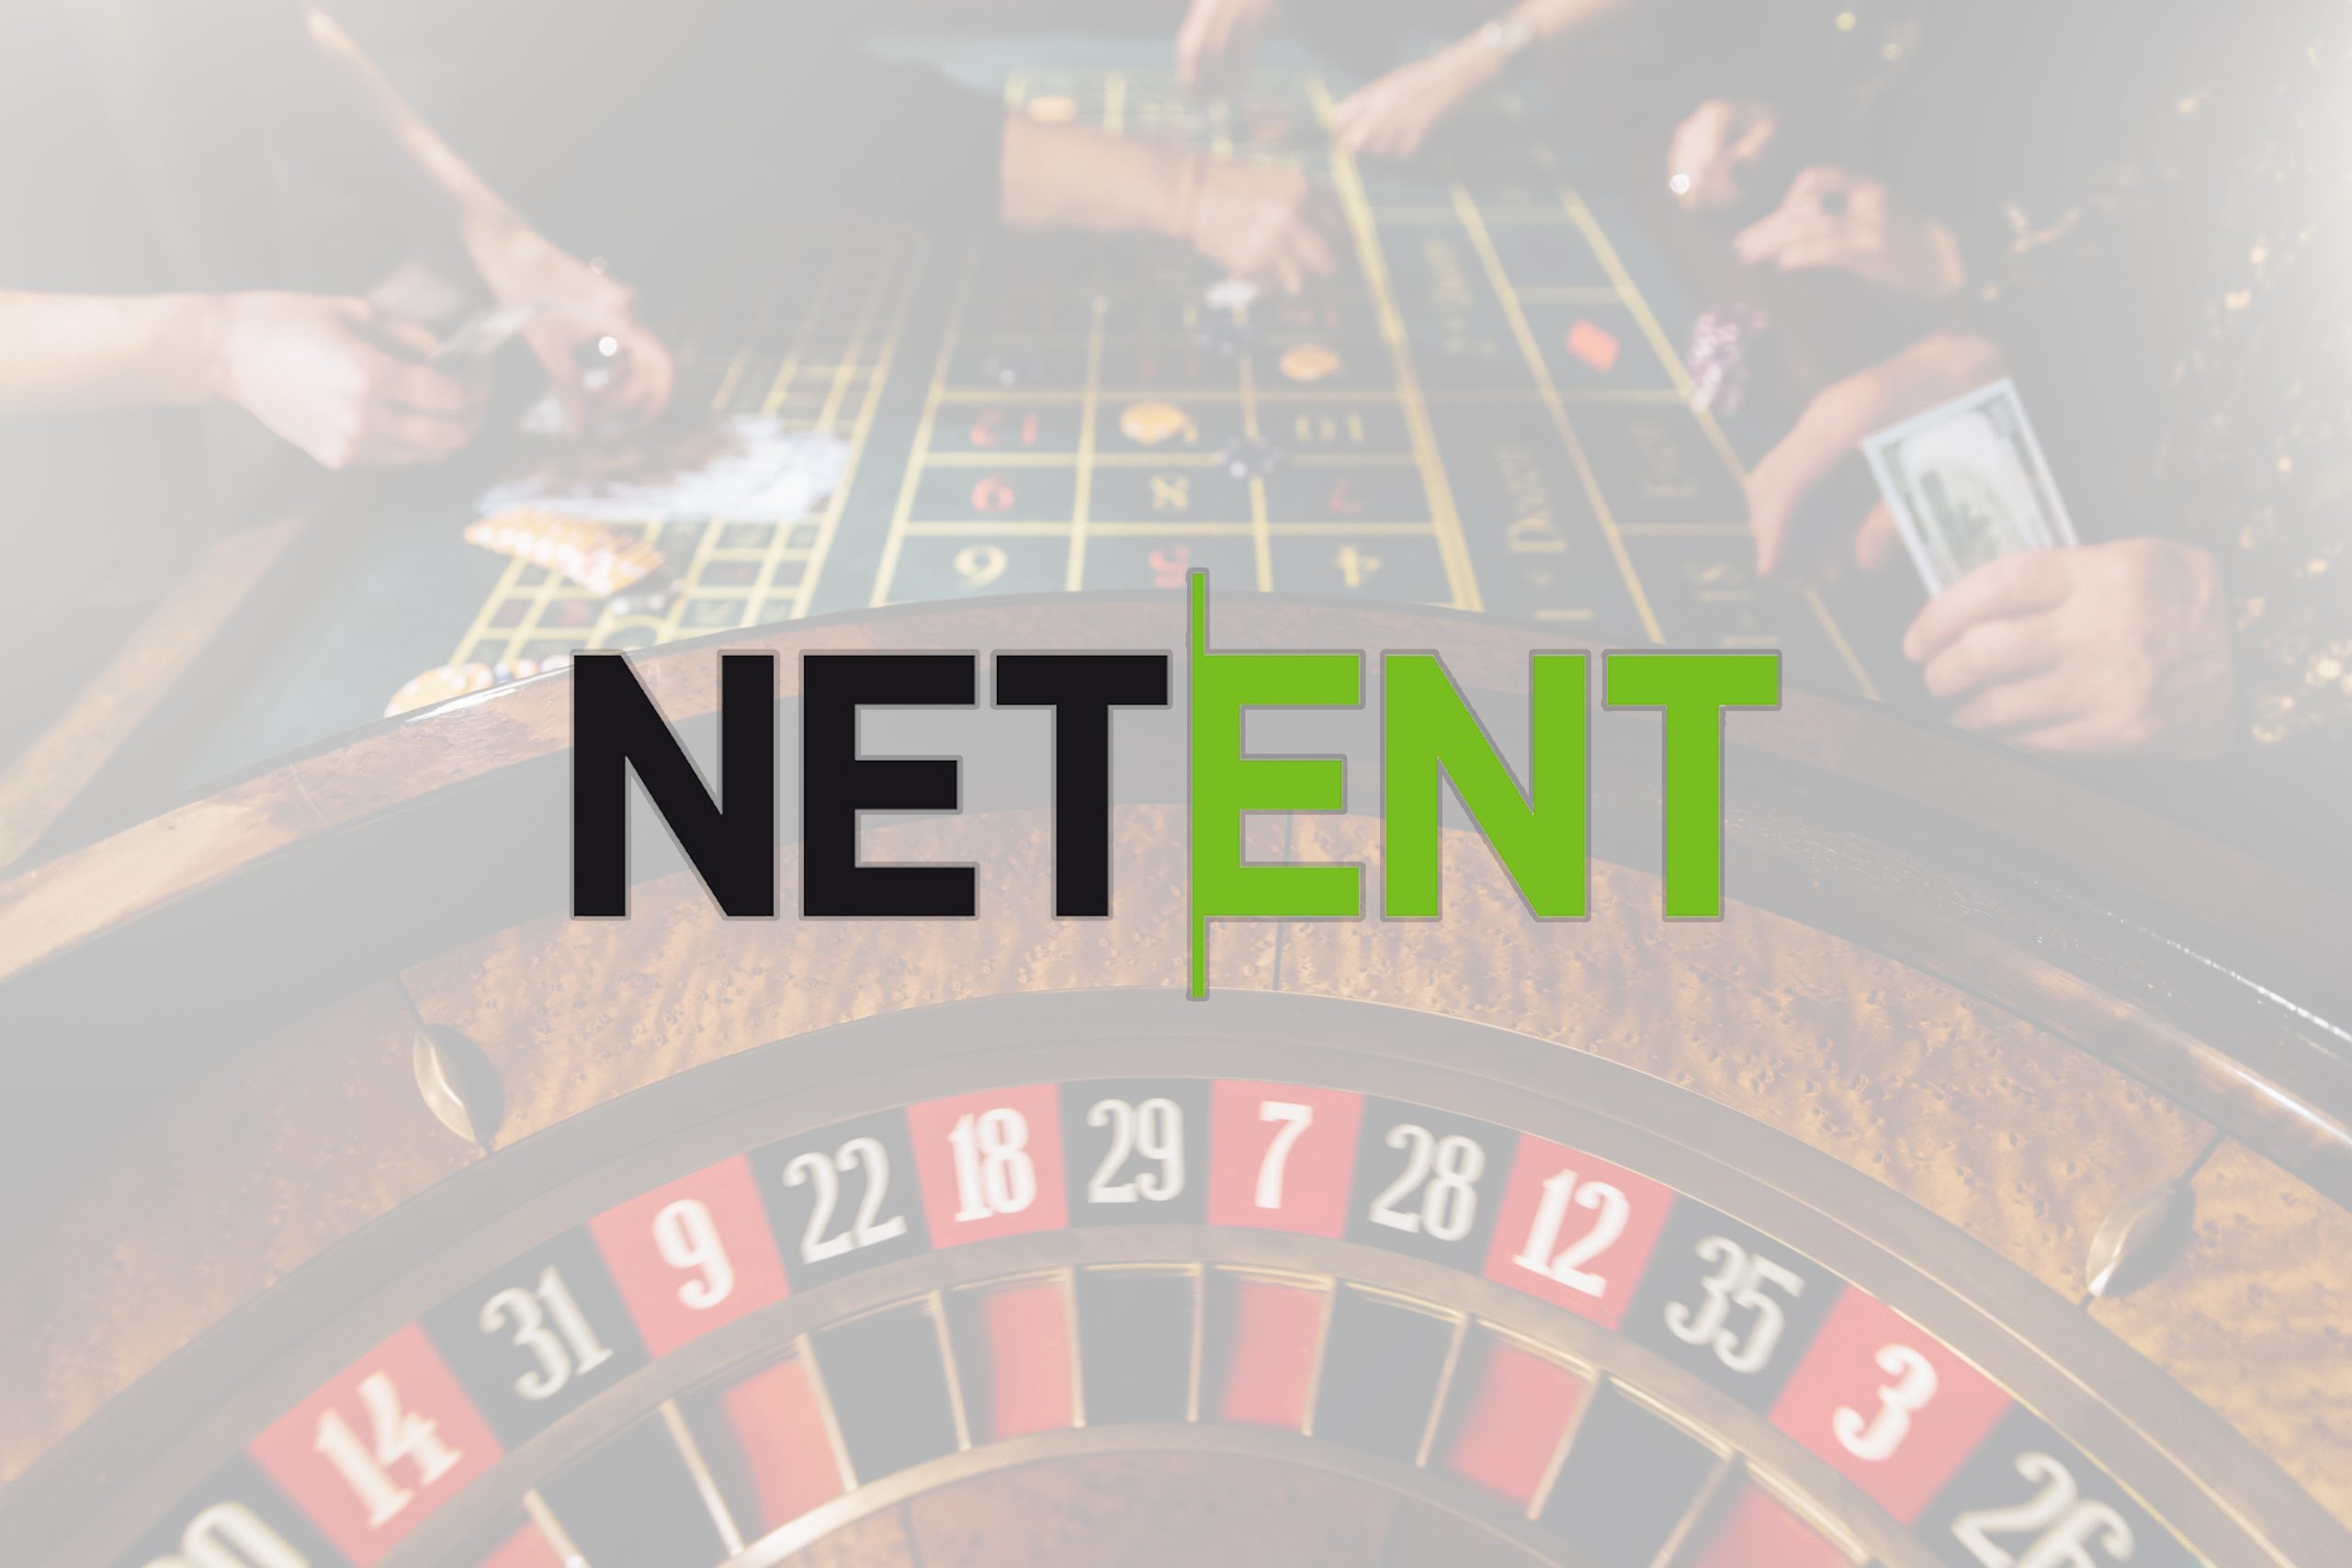 NetEnt: Software Provider Of For Casinos Not On Gamstop